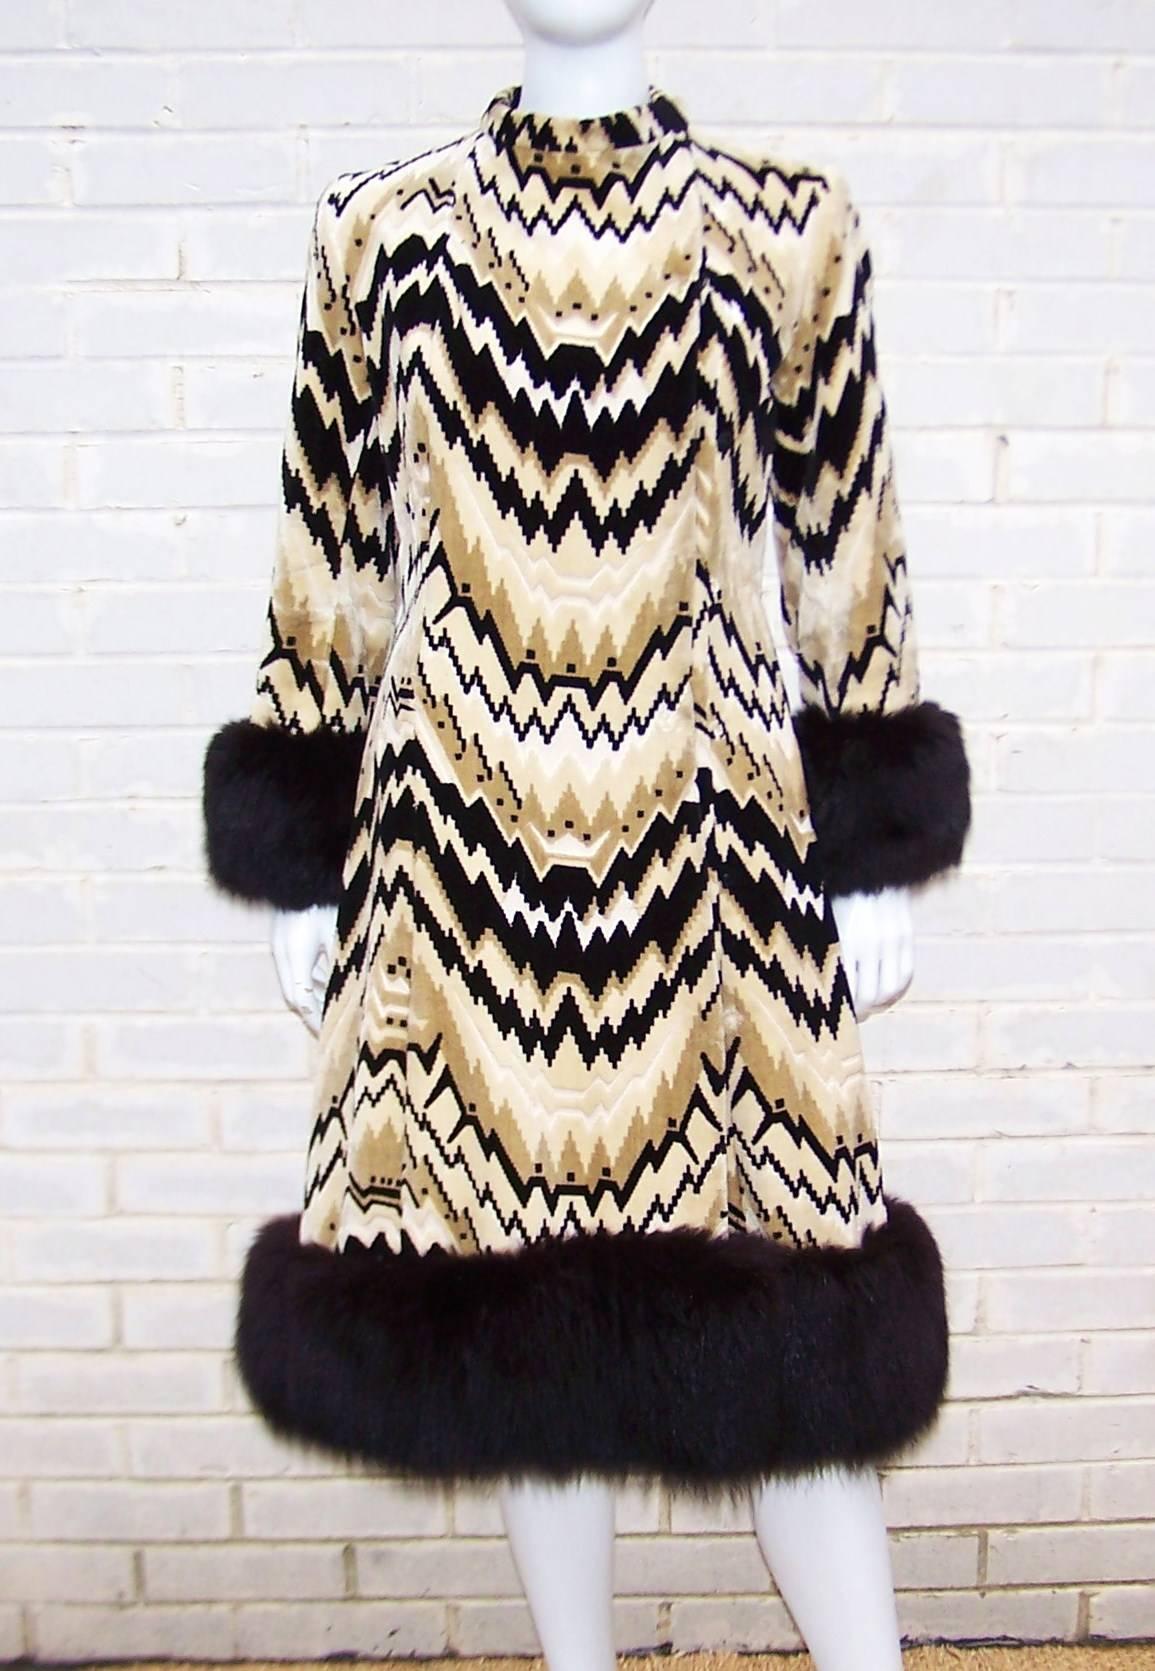 This coat is phenomenal!  A fashionable piece of graphic art with the added bonus of a snuggly wrap.  The heavy cut velvet fabric is an eye popping chevron design in black, creme and tan.  As if that wasn't sumptuous enough, the hem and cuffs are